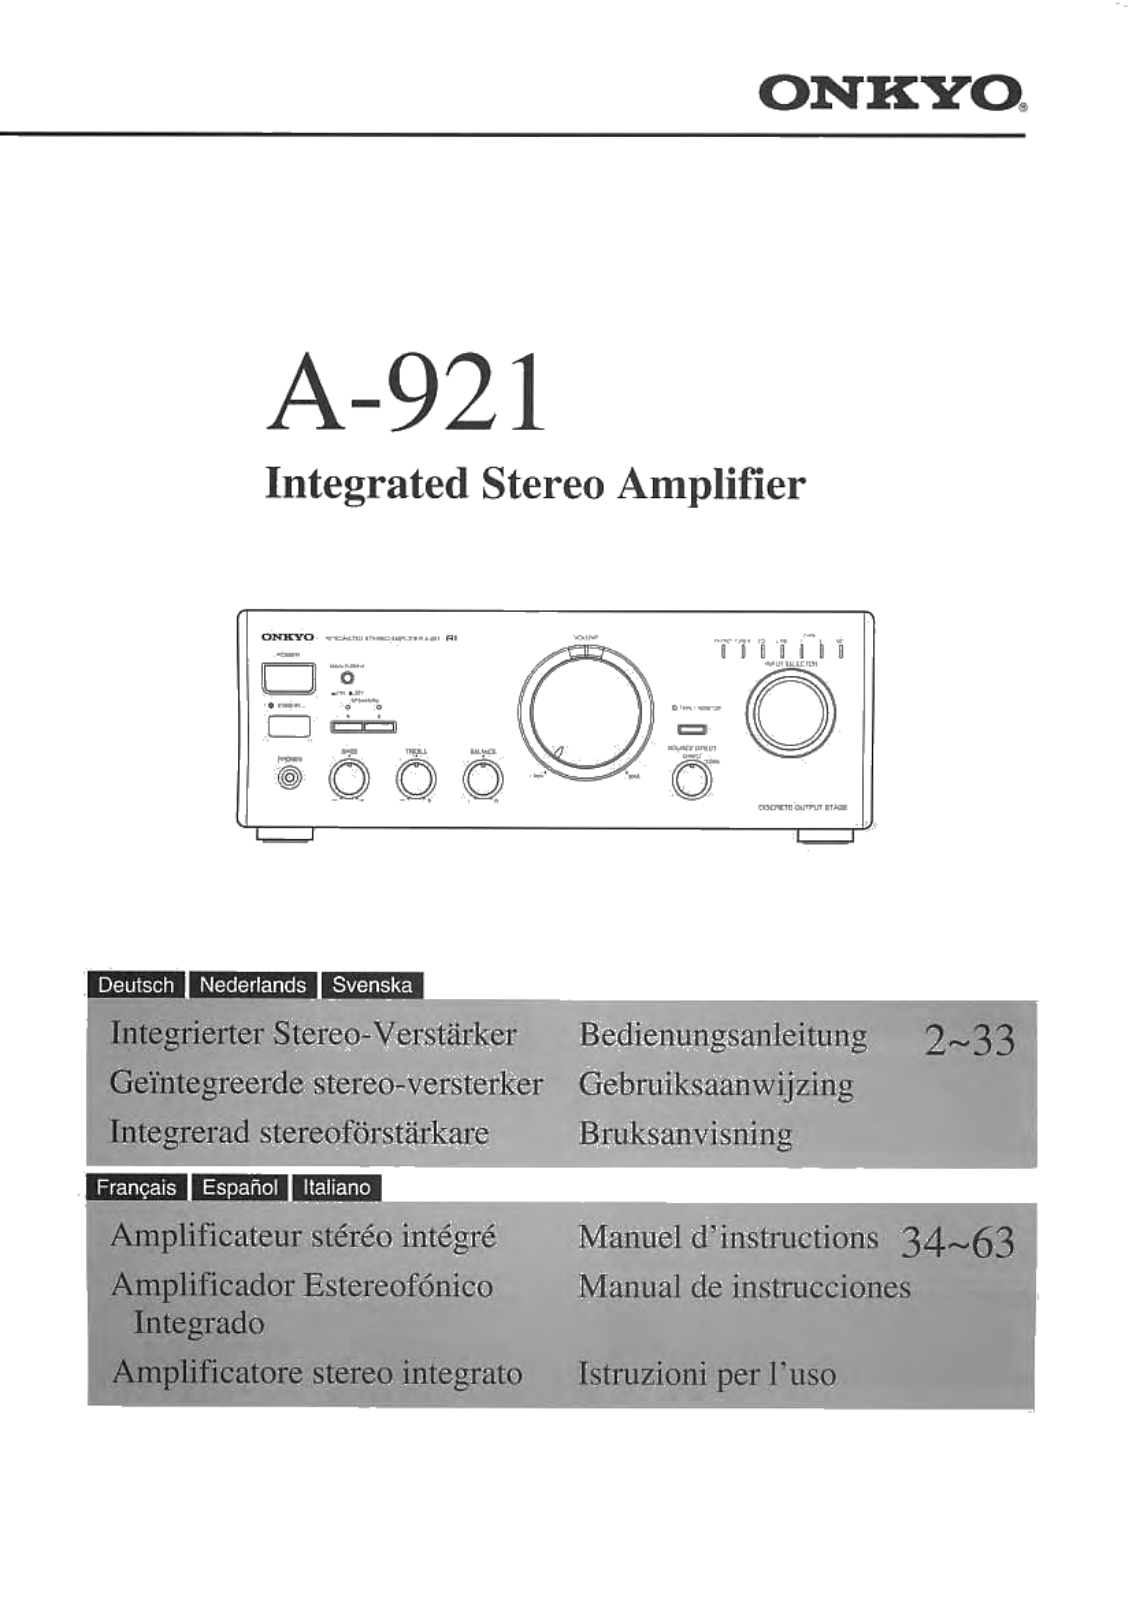 Onkyo A-921 Owners Manual